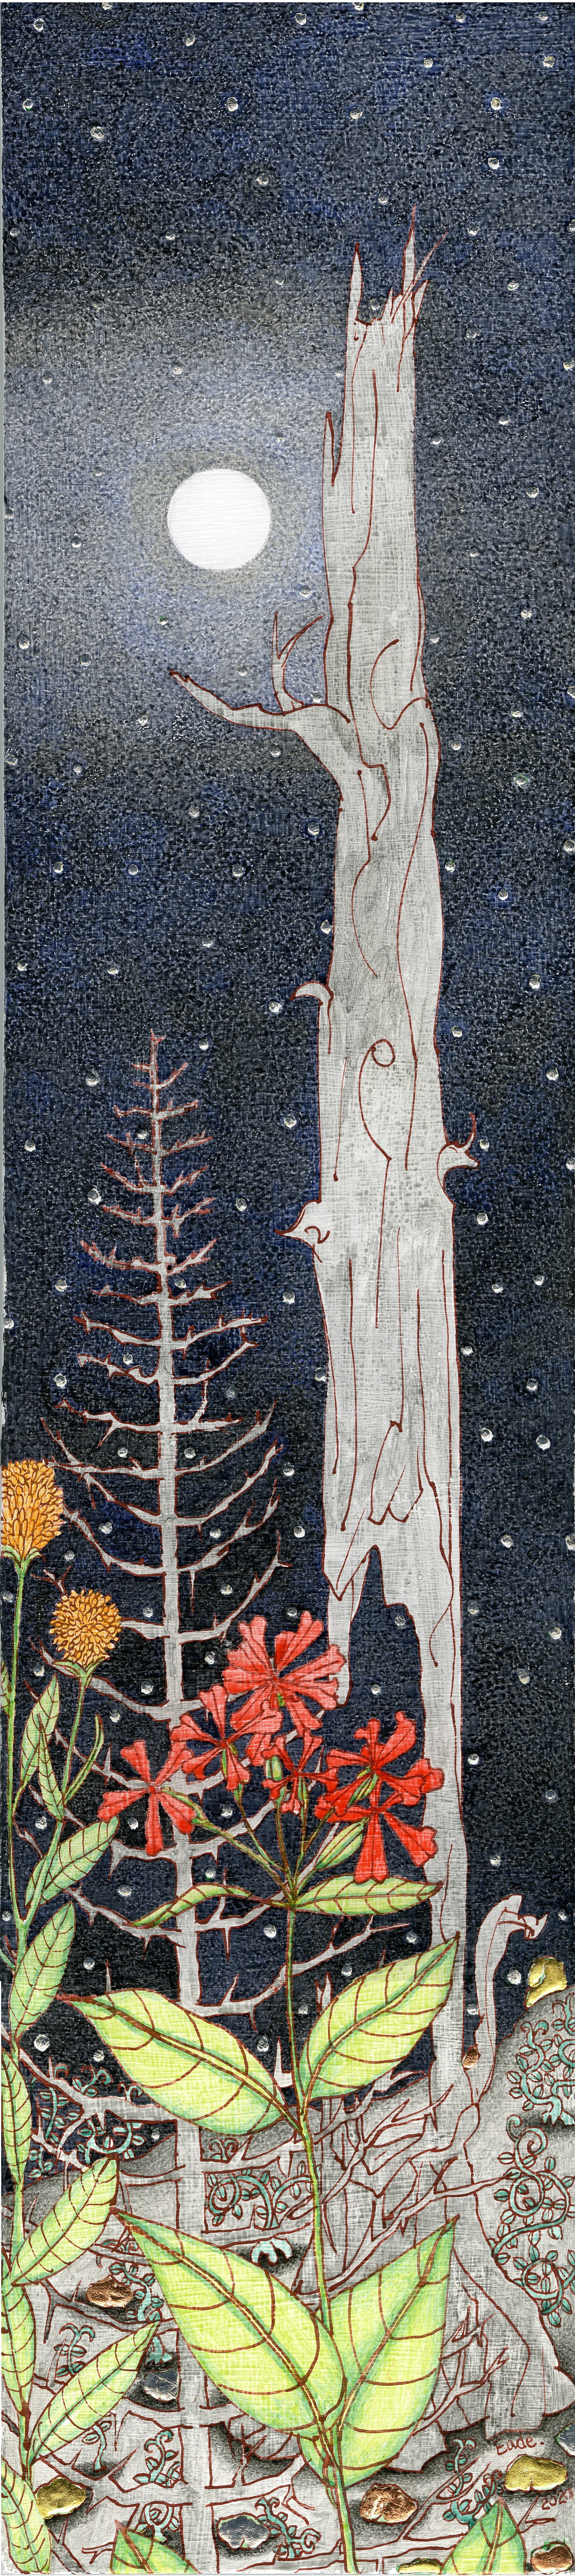  Michael Eade,  Full Moon and Stars (Study), No. 3,  2021. Egg tempera, raised 22k gold leaf, raised copper and aluminum leaf on wood panel. 22.5 x 5 inches @Michael Eade, courtesy of Fou Gallery 